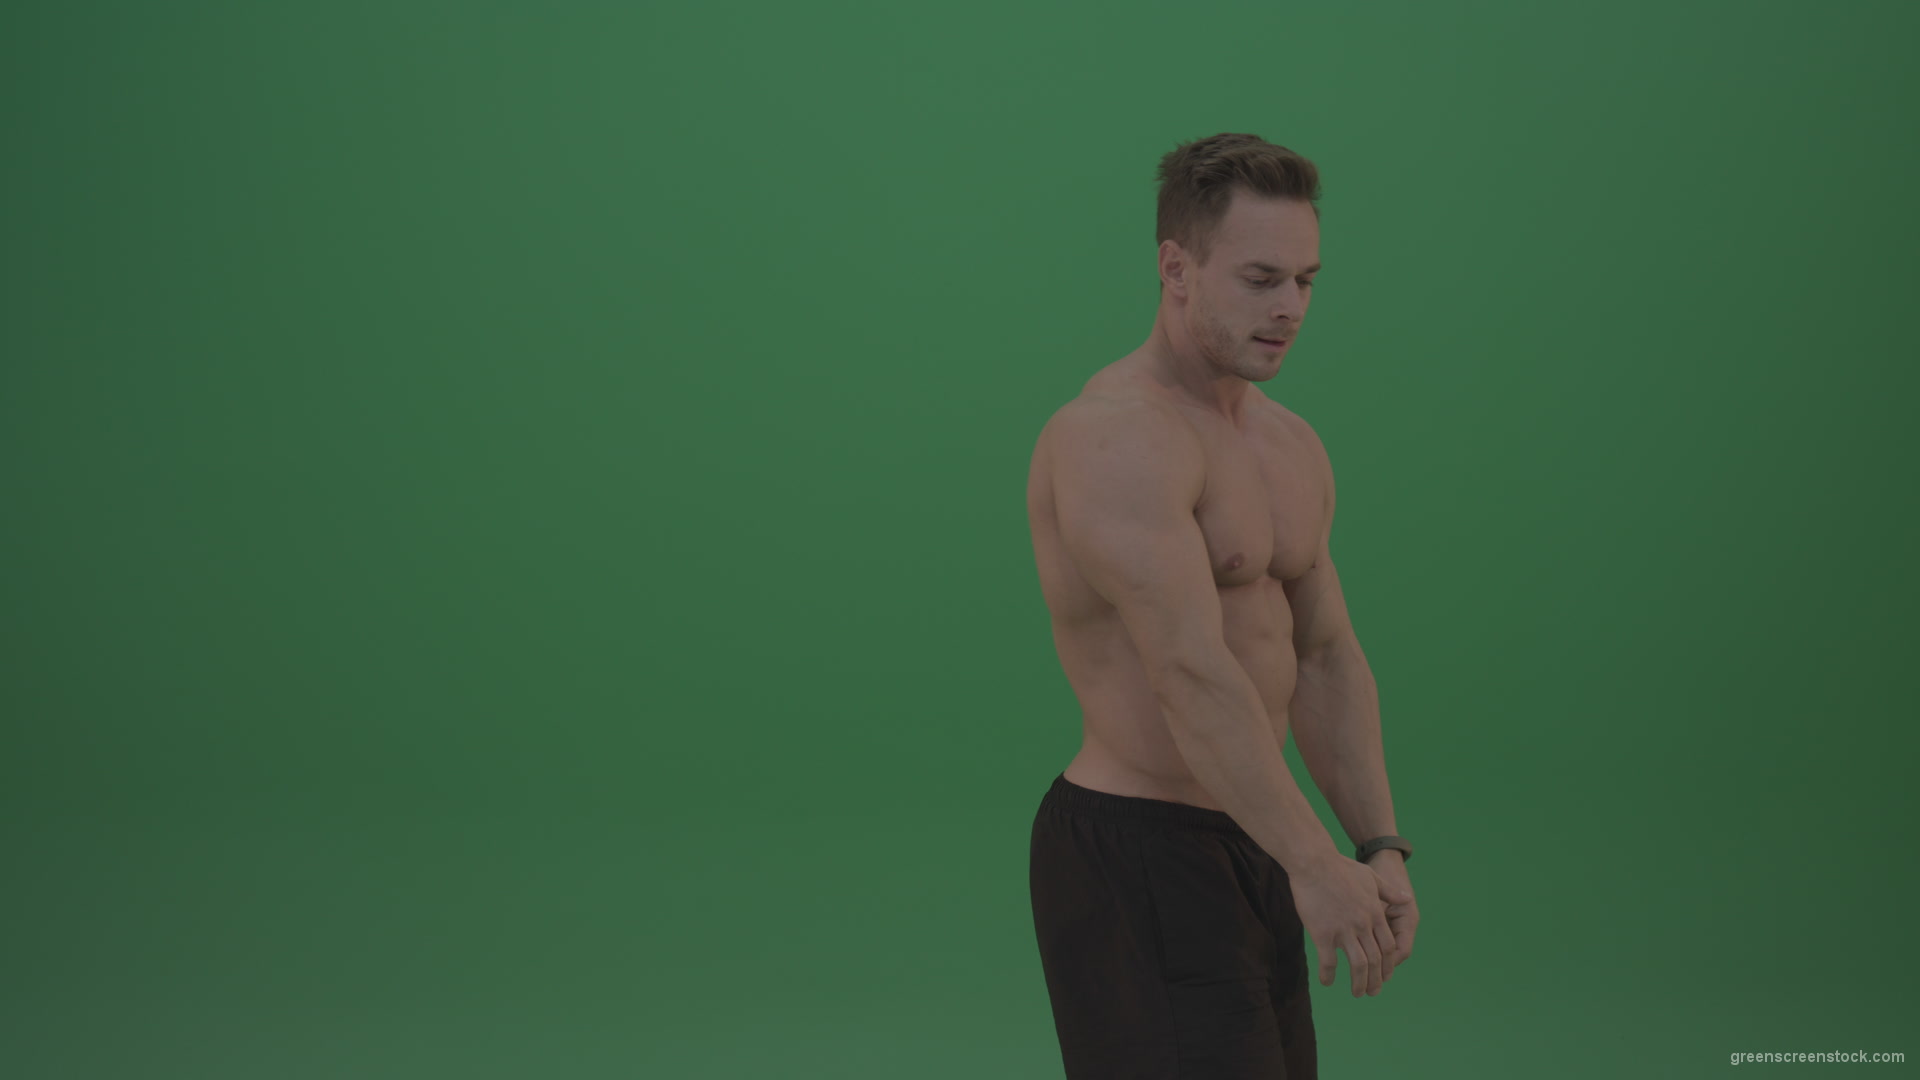 Green-Screen-Blone_Bodybuilder_Demonstrating_Front_Double_Biceps_And_Lateral_Spread_Positions_On_Green_Screen_Wall_Background_007 Green Screen Stock